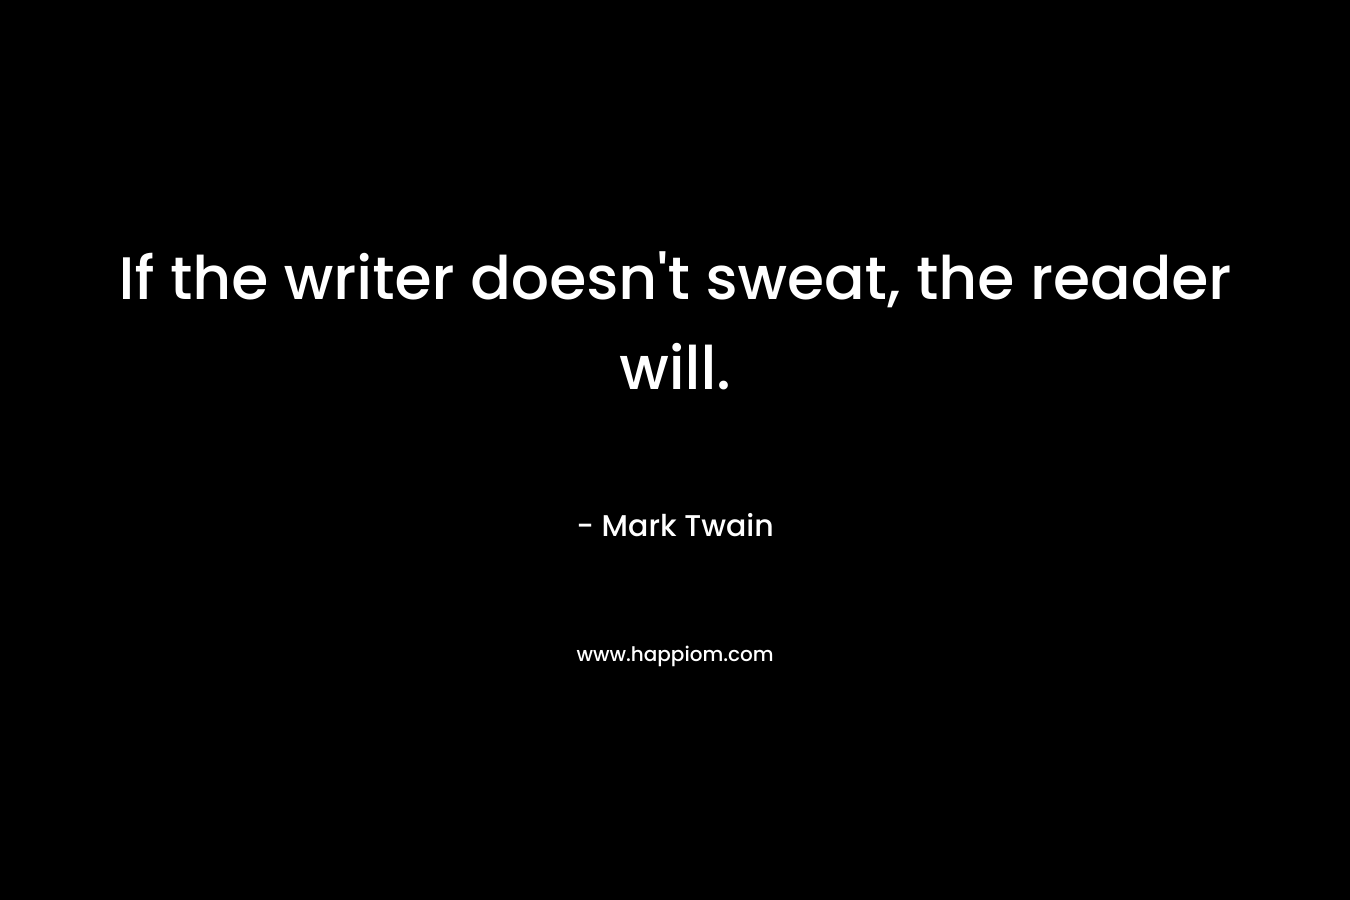 If the writer doesn’t sweat, the reader will. – Mark Twain